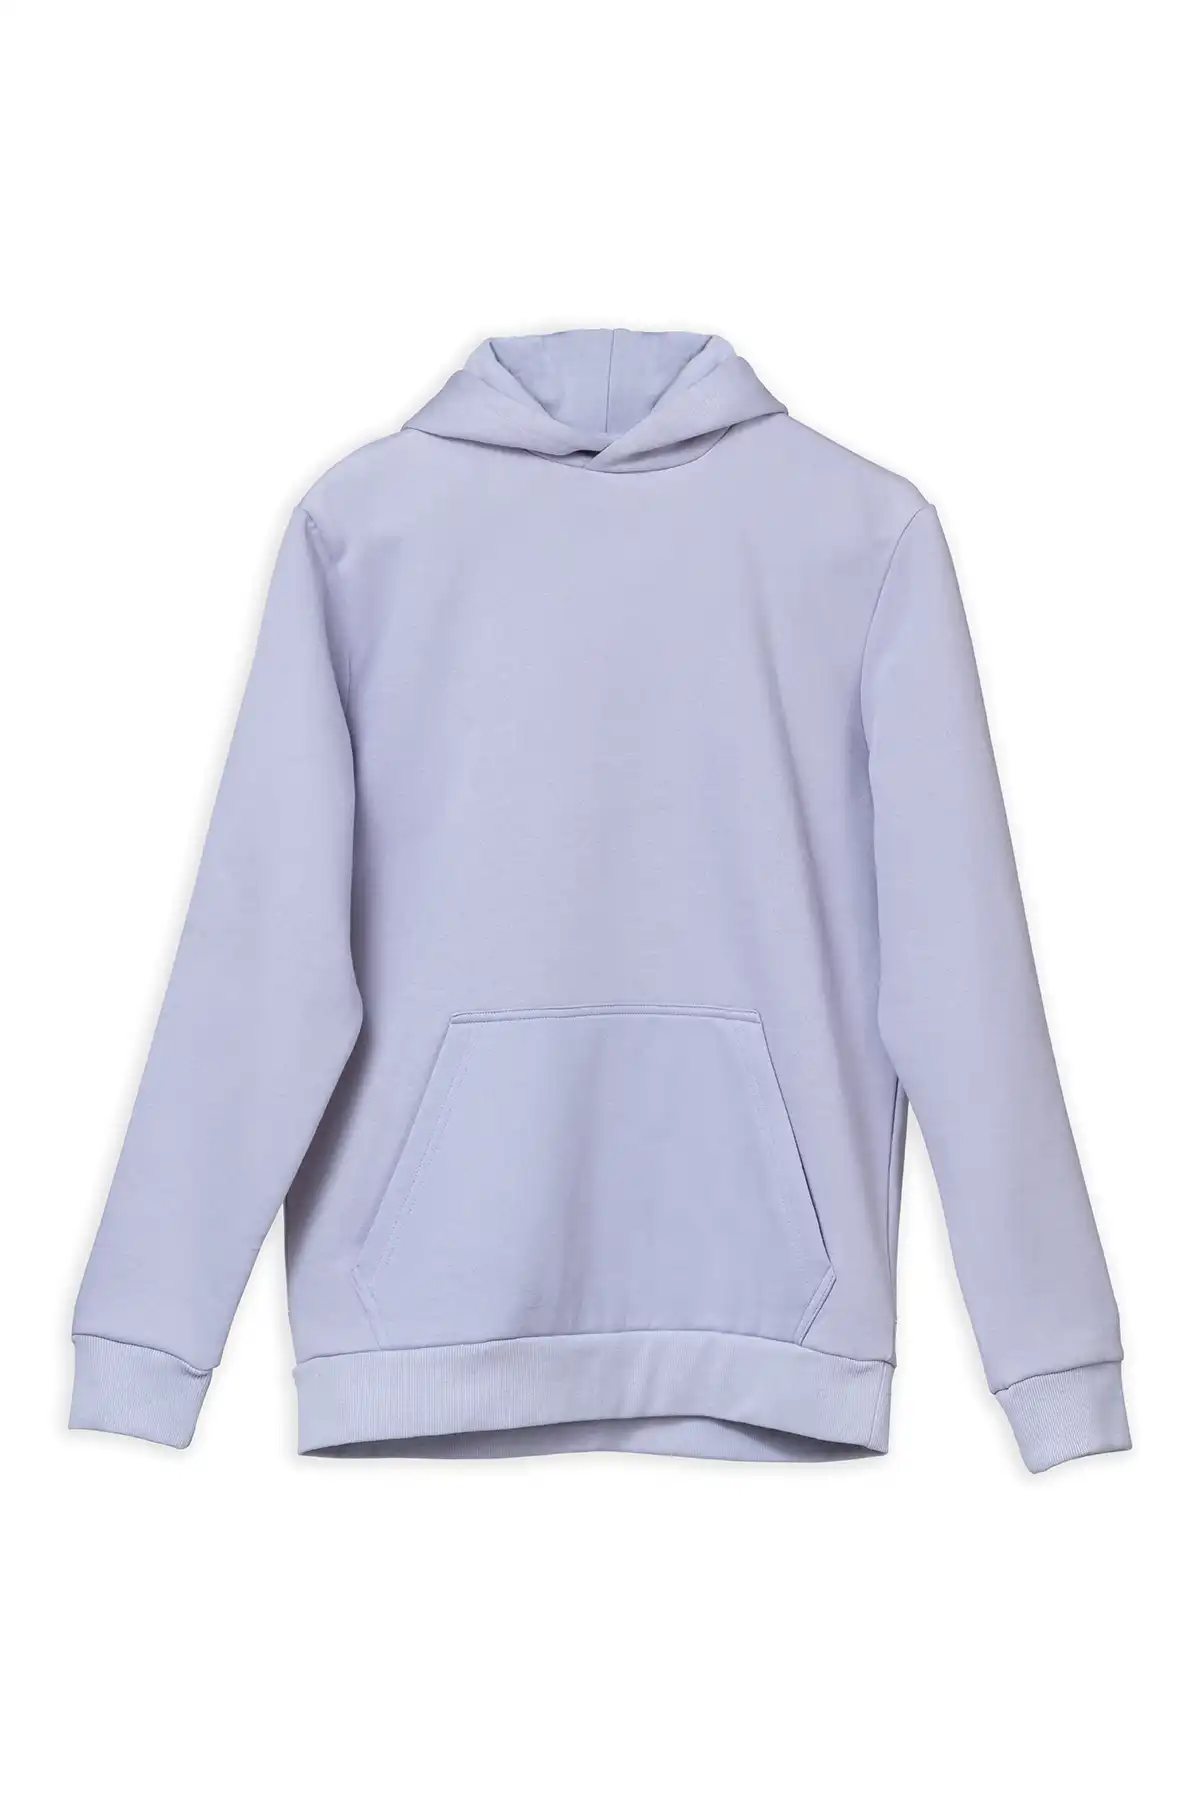 Unisex Relaxed Fit Hoodie - Mauve